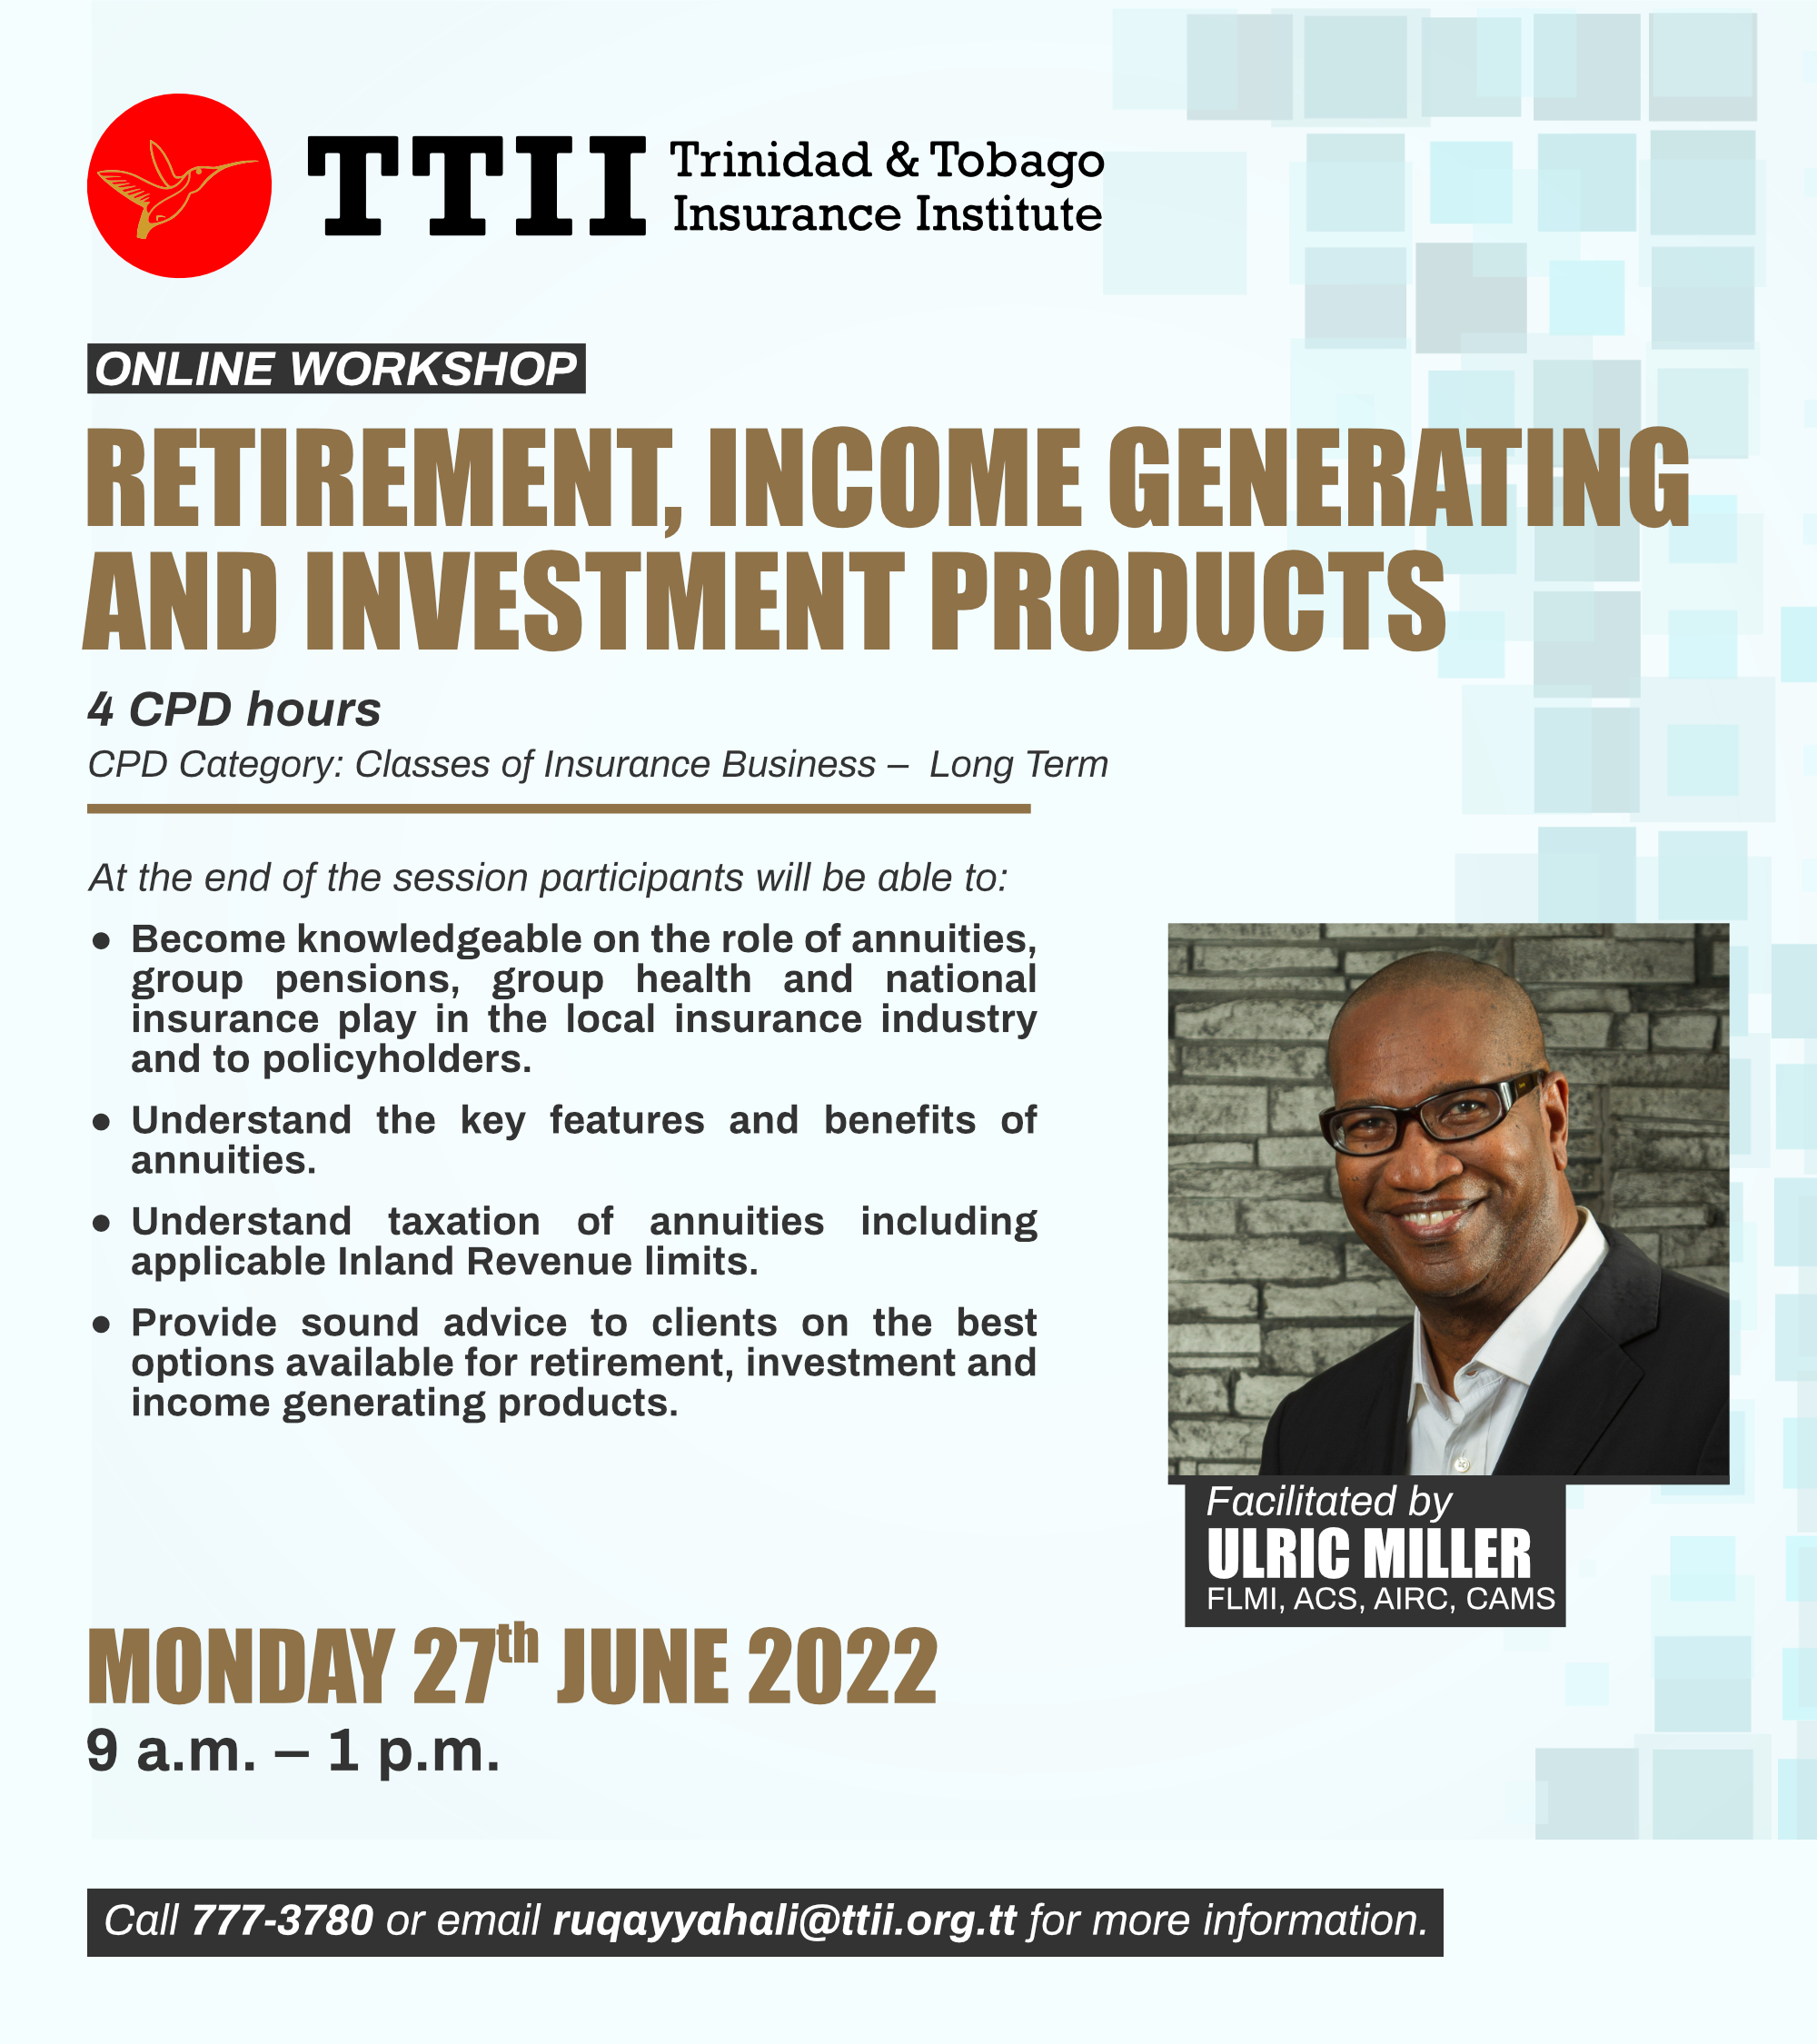 Retirement, Income Generating and Investment Products